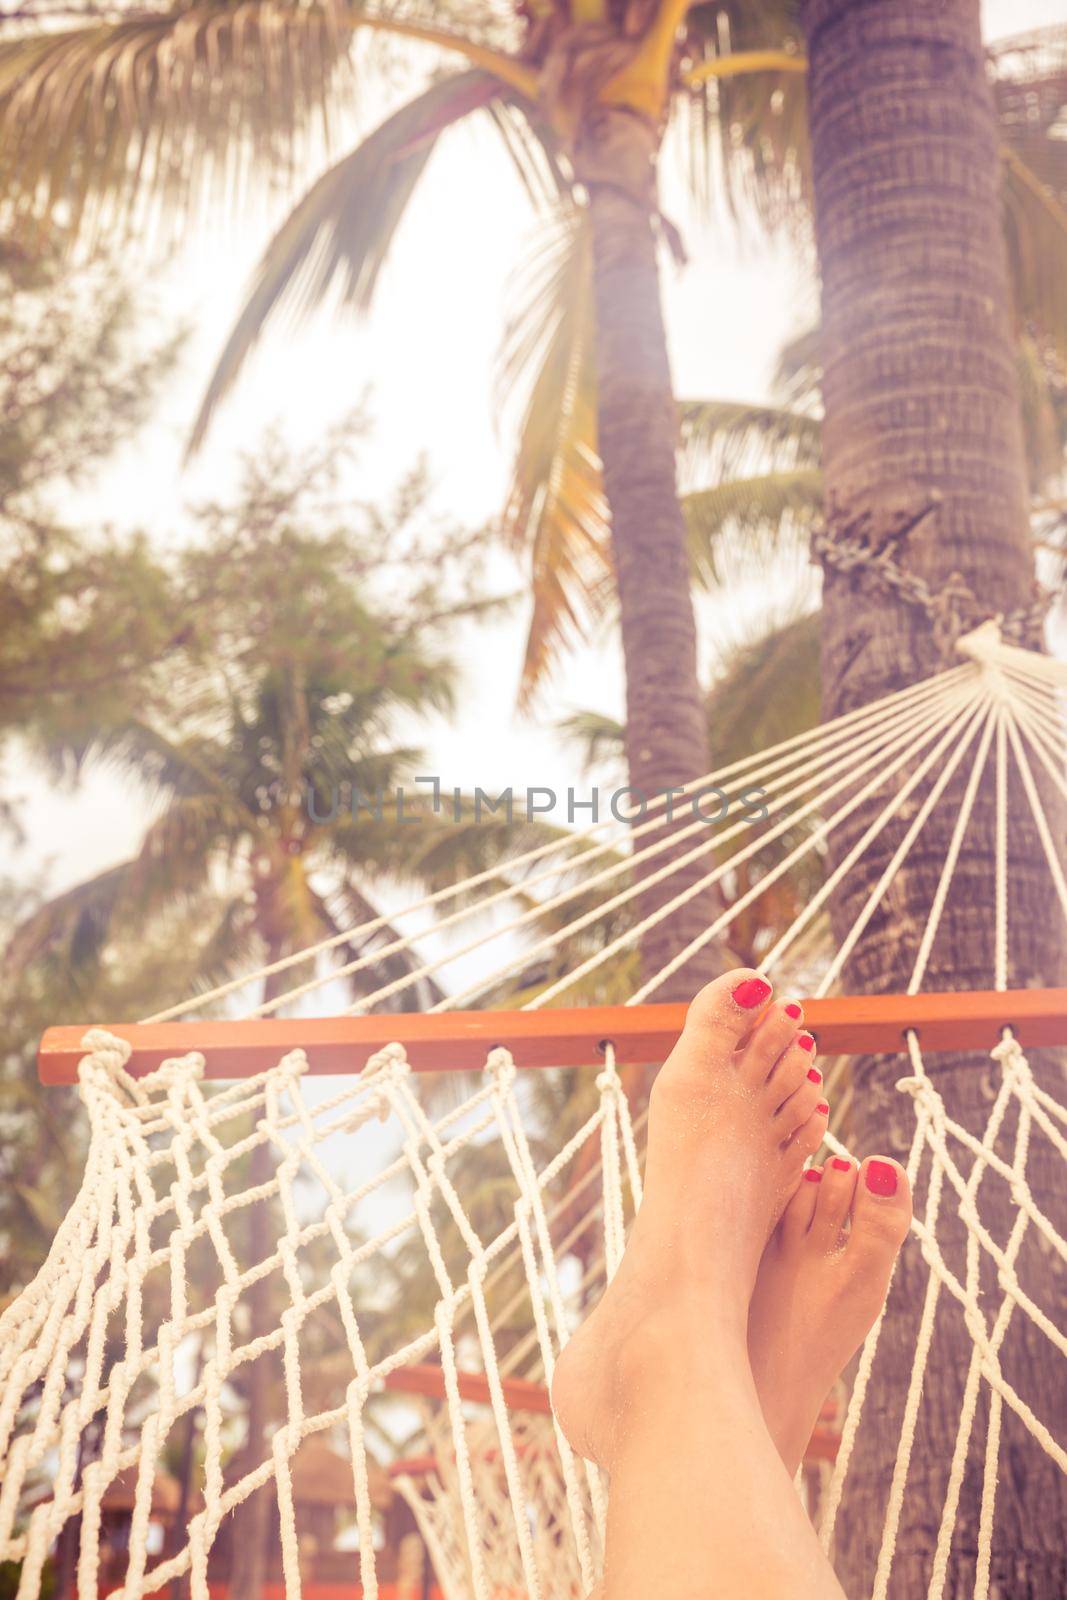 Female legs in a hammock on a background of the sea, palm trees and sunset. Vacation concept with copy space and orange color tone